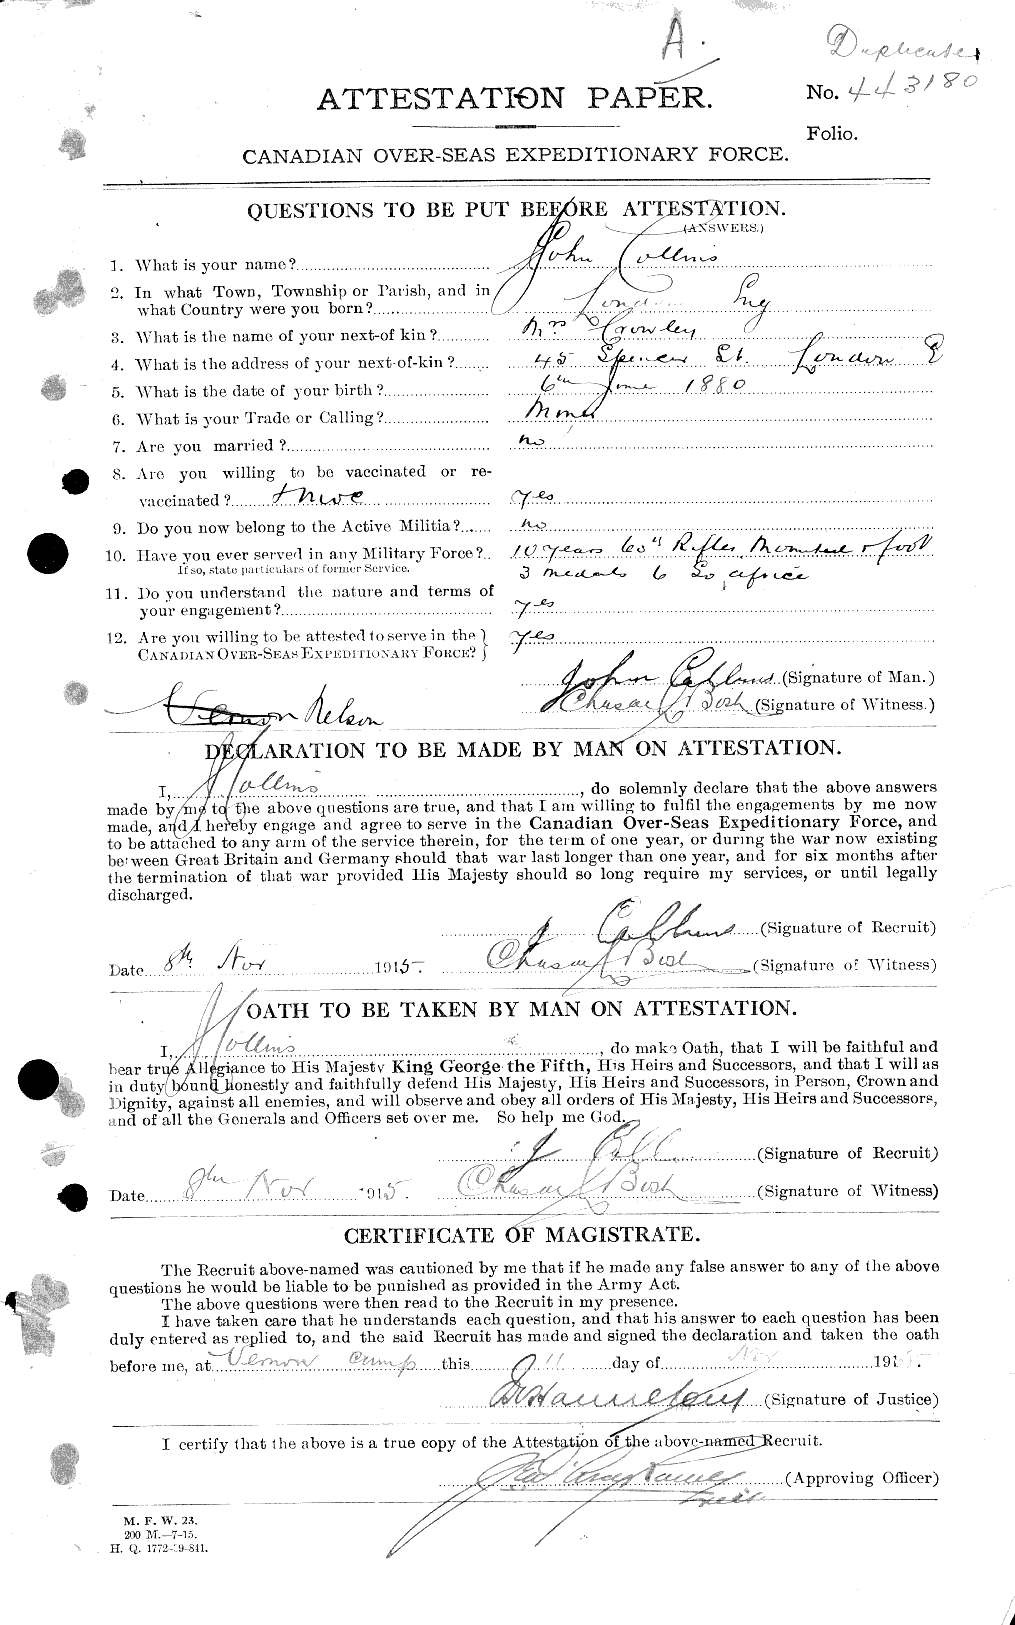 Personnel Records of the First World War - CEF 037980a